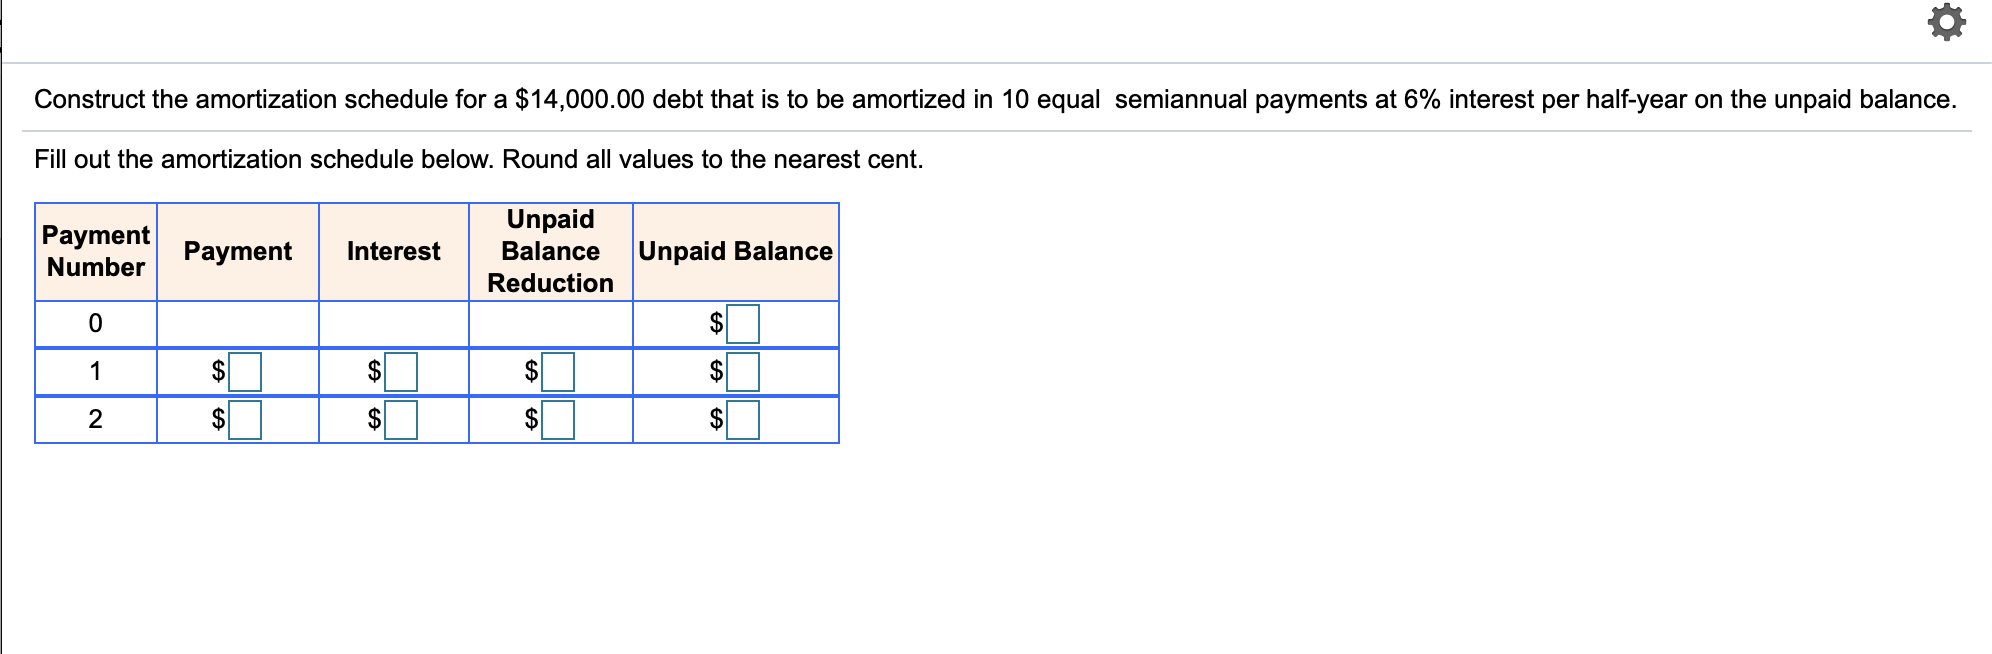 Construct the amortization schedule for a $14,000.00 debt that is to be amortized in 10 equal semiannual payments at 6% interest per half-year on the unpaid balance.
Fill out the amortization schedule below. Round all values to the nearest cent.
Unpaid
Payment Payment
Interest
Balance
|Unpaid Balance
Number
Reduction
1
$
$
2
$
$
EA
